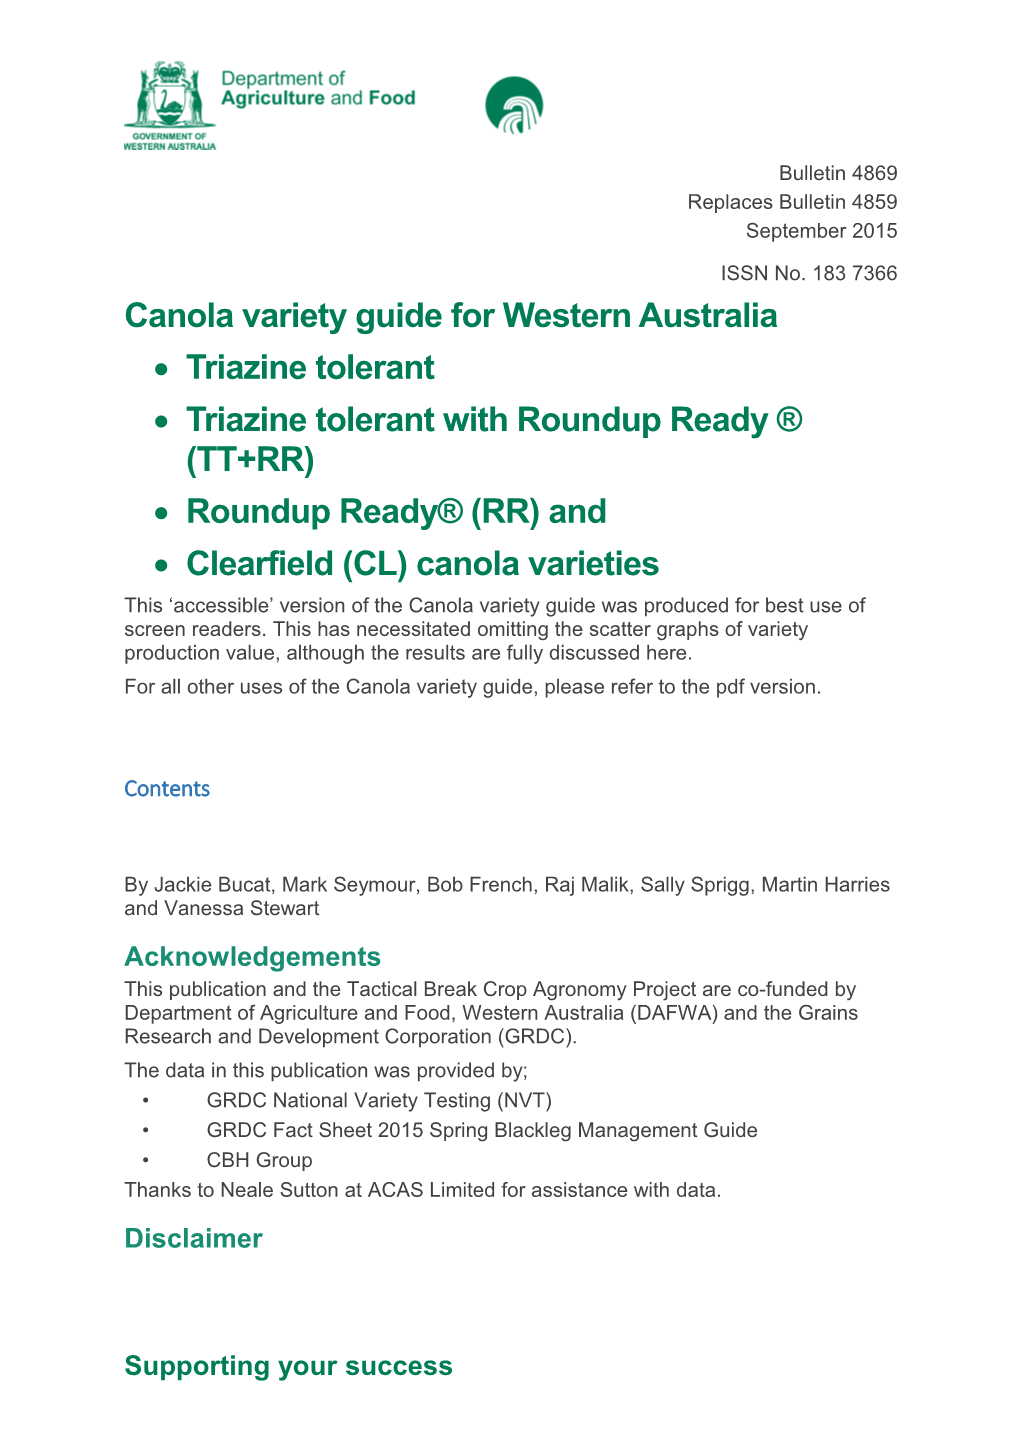 Canola Variety Guide for Western Australia